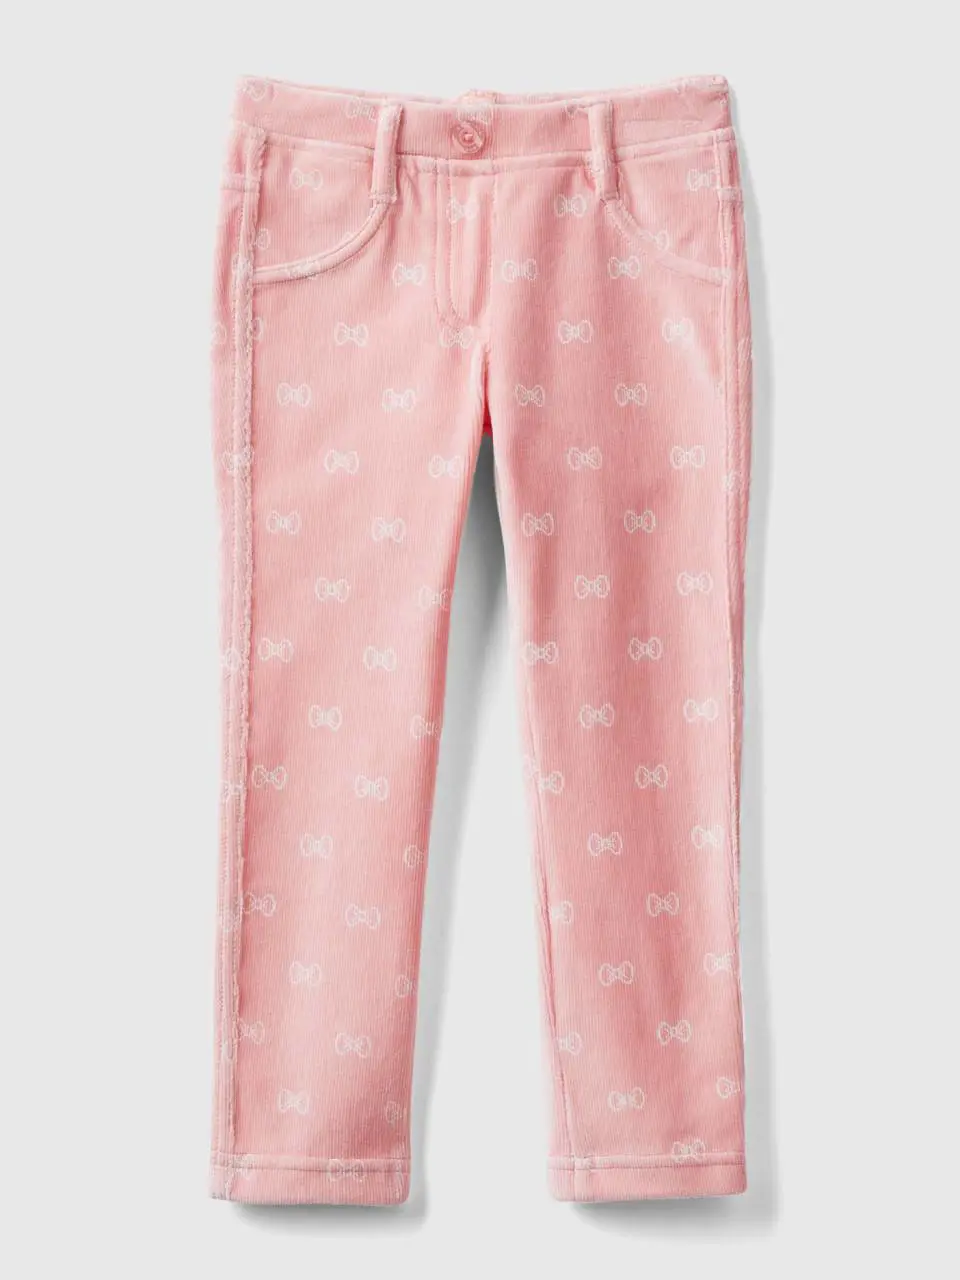 Benetton pink jeggings with bow print. 1